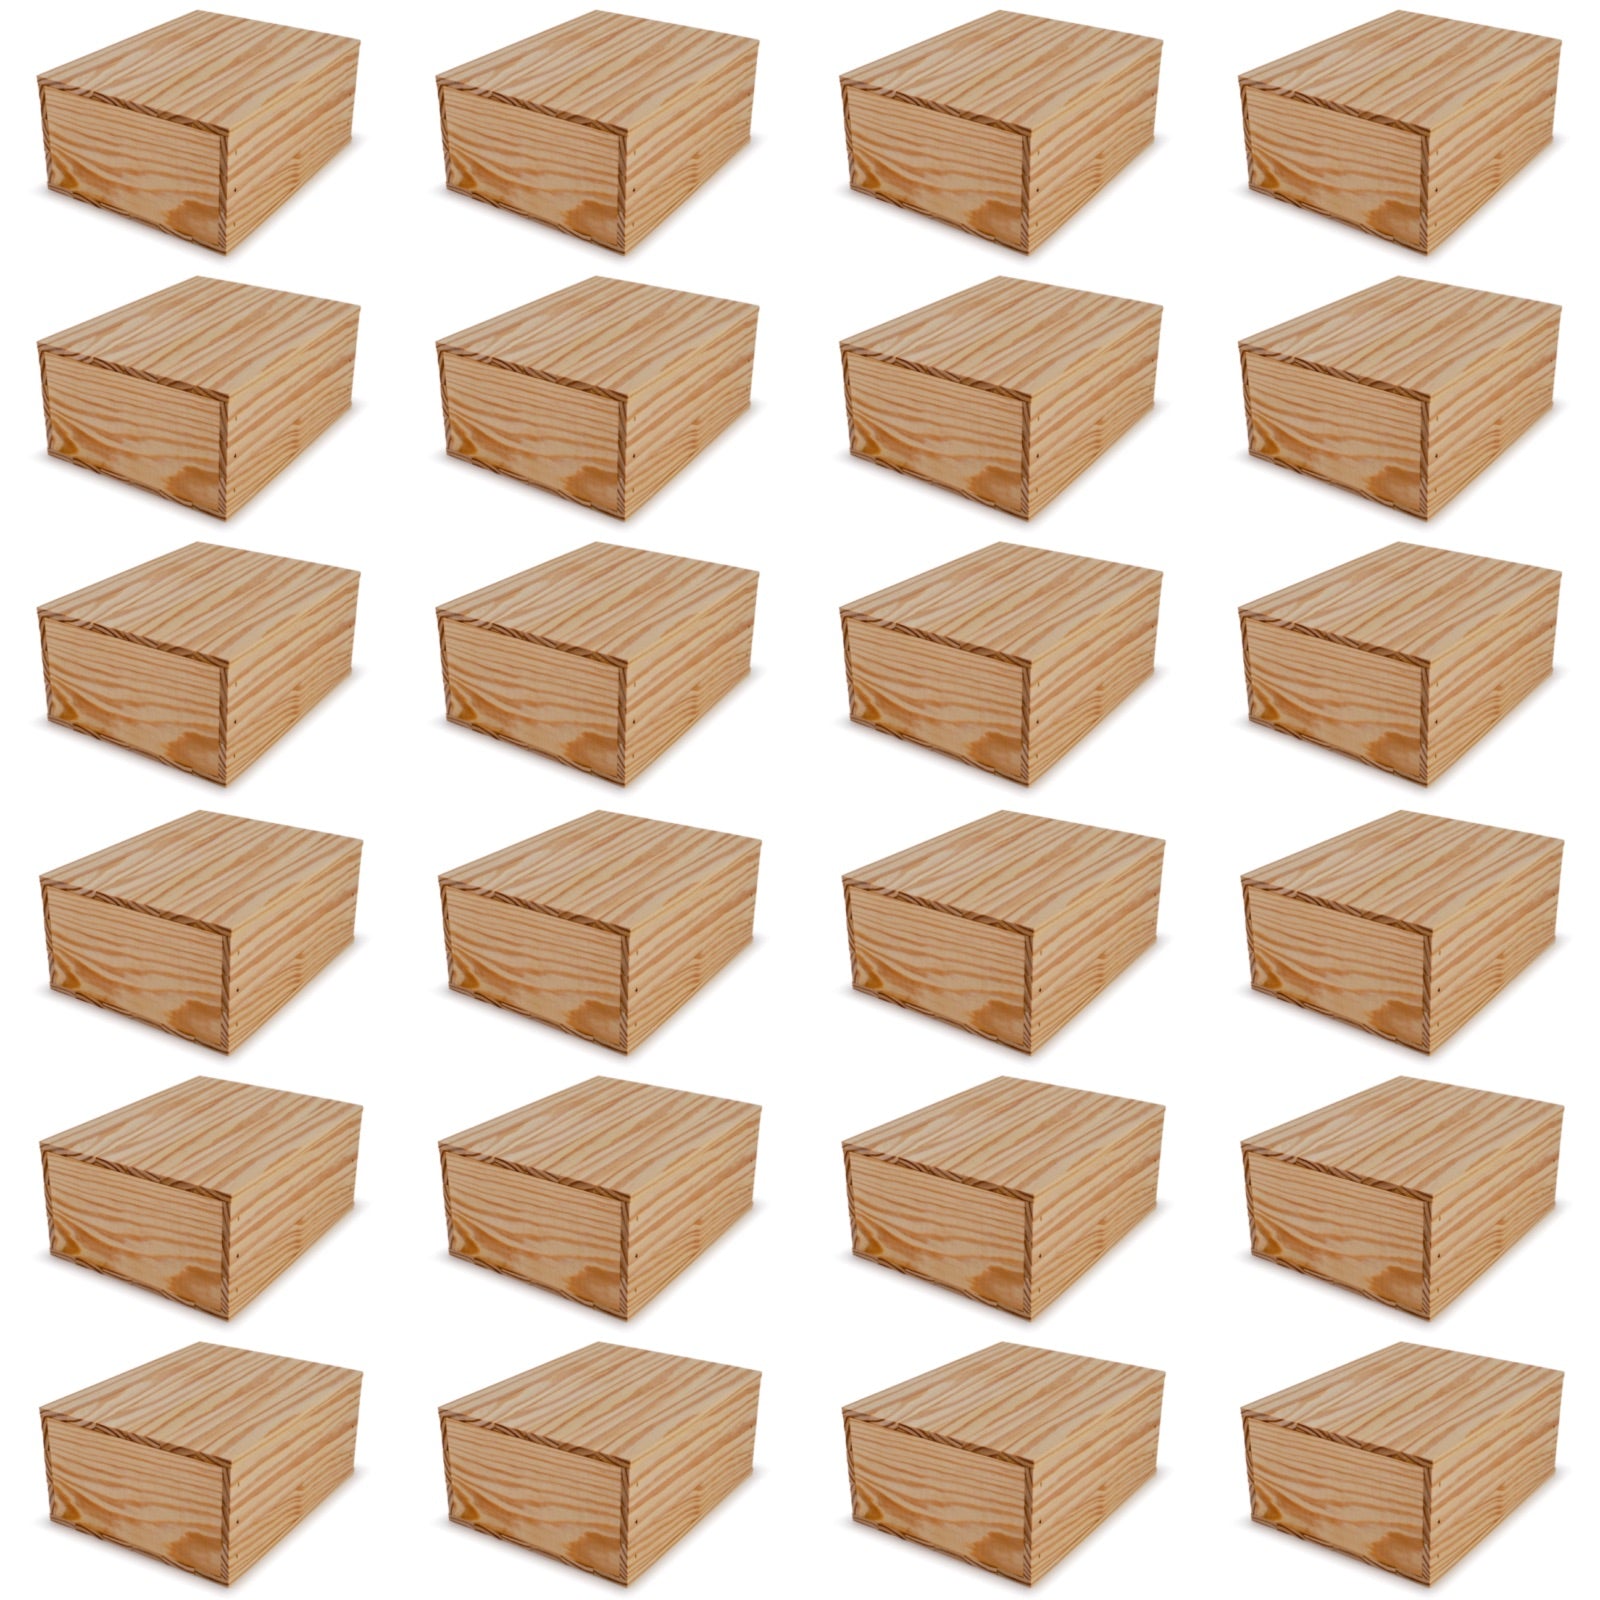 24 Small wooden crates with lid 12x9.75x5.25